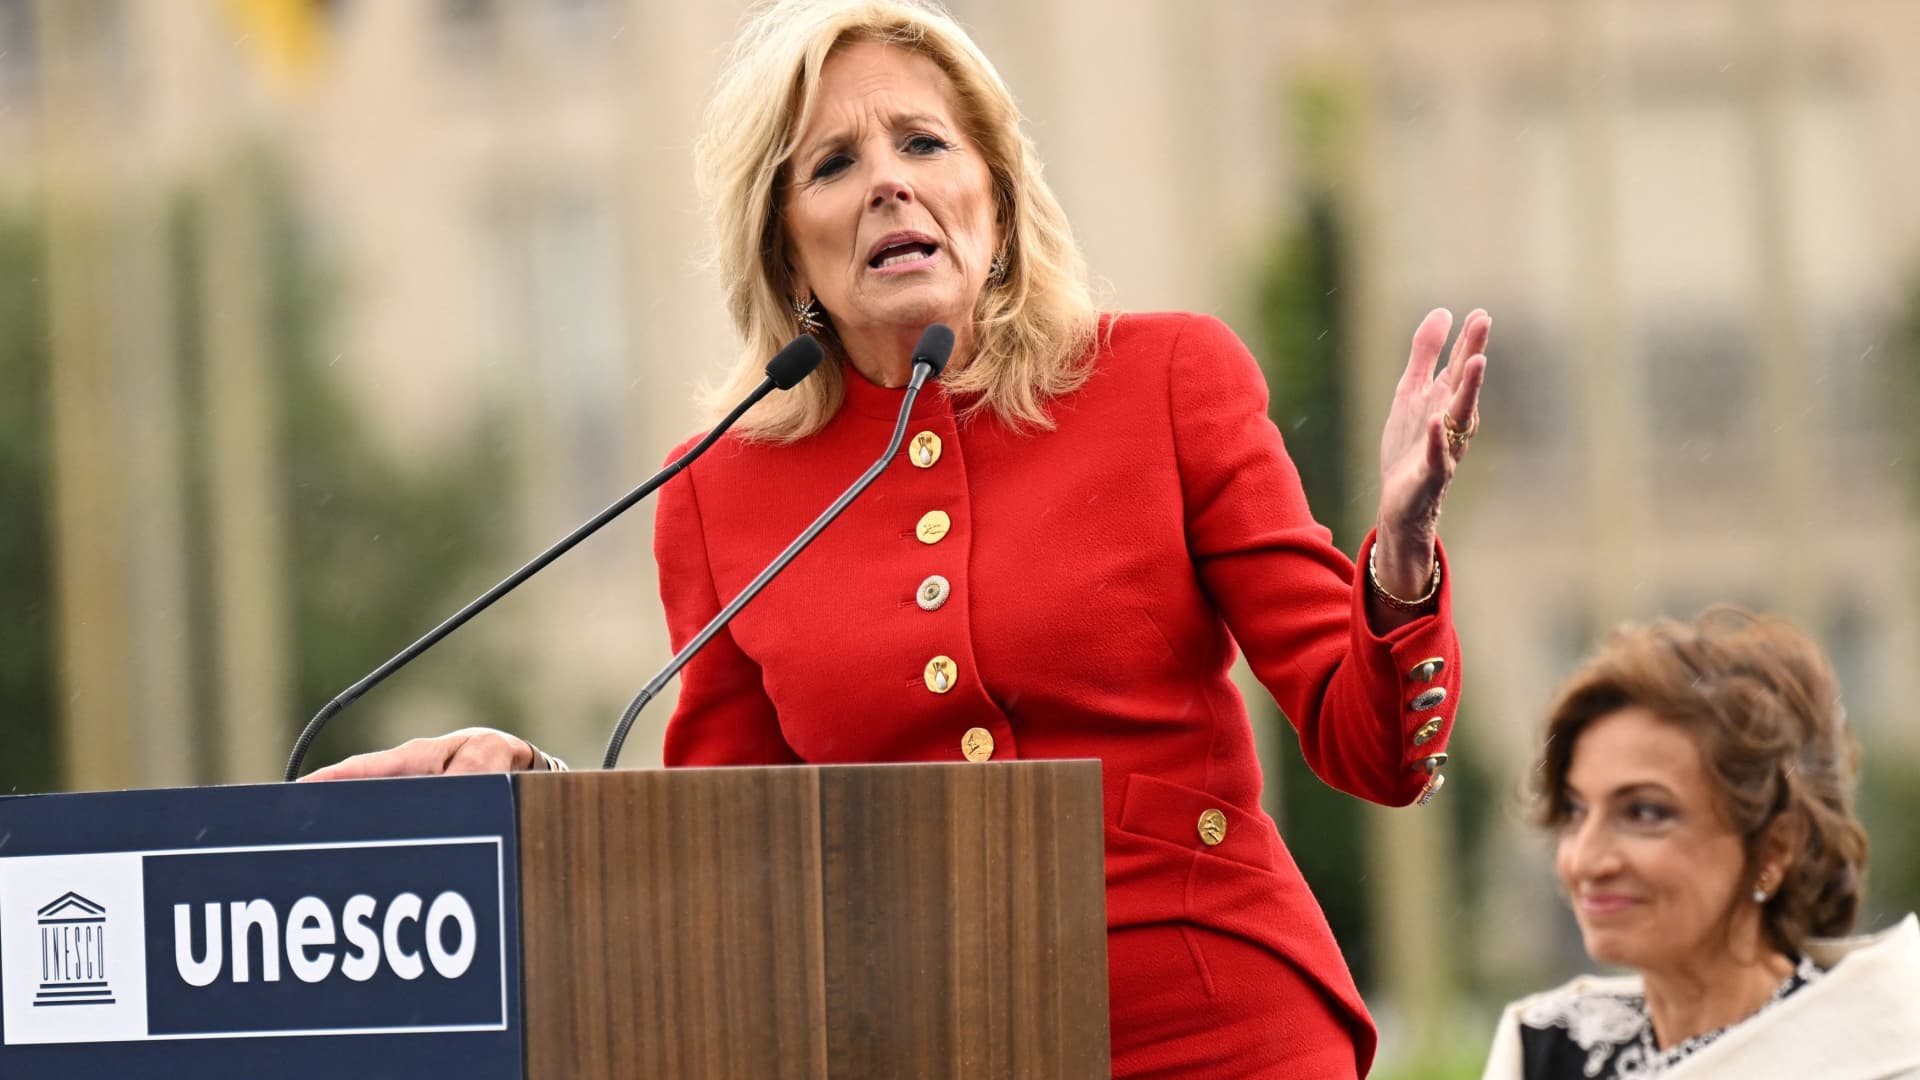 First Lady Jill Biden speaks during a flag-raising ceremony for the return of the U.S. to UNESCO after an over half-decade absence, at the UNESCO headquarters in Paris on July 25, 2023.